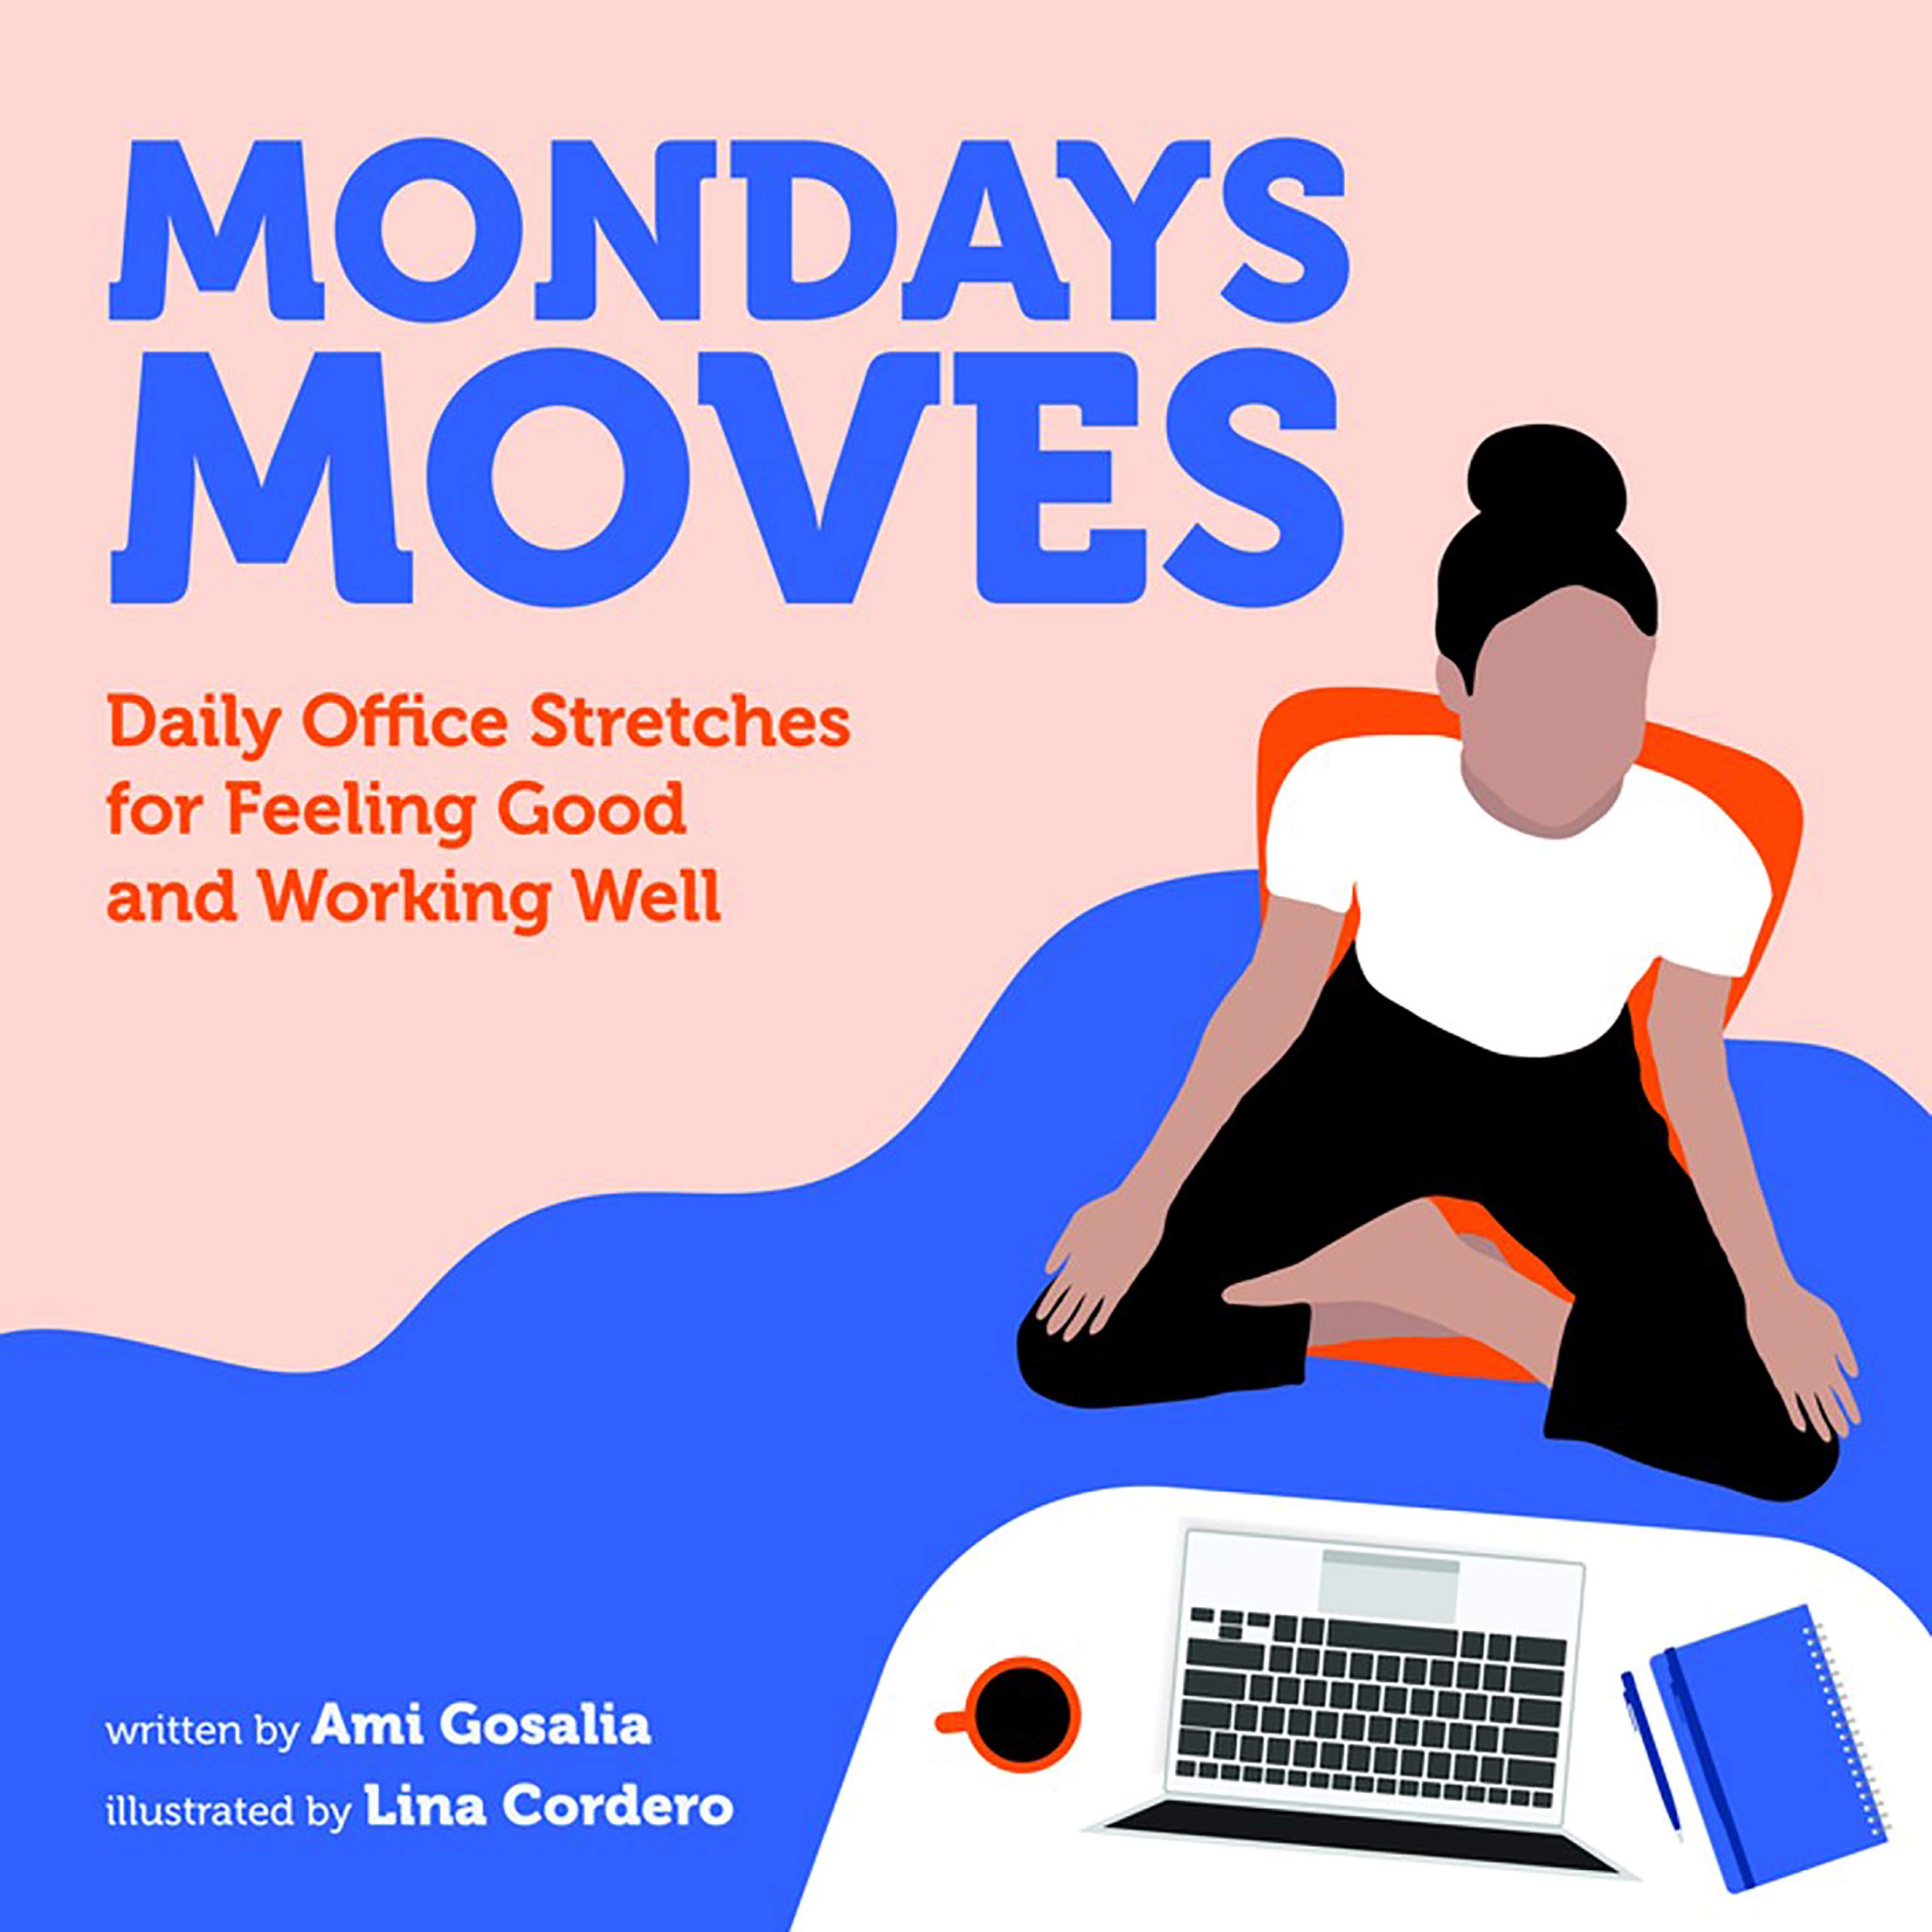 Mondays Moves: Daily Office Stretches for Feeling Good and Working Well